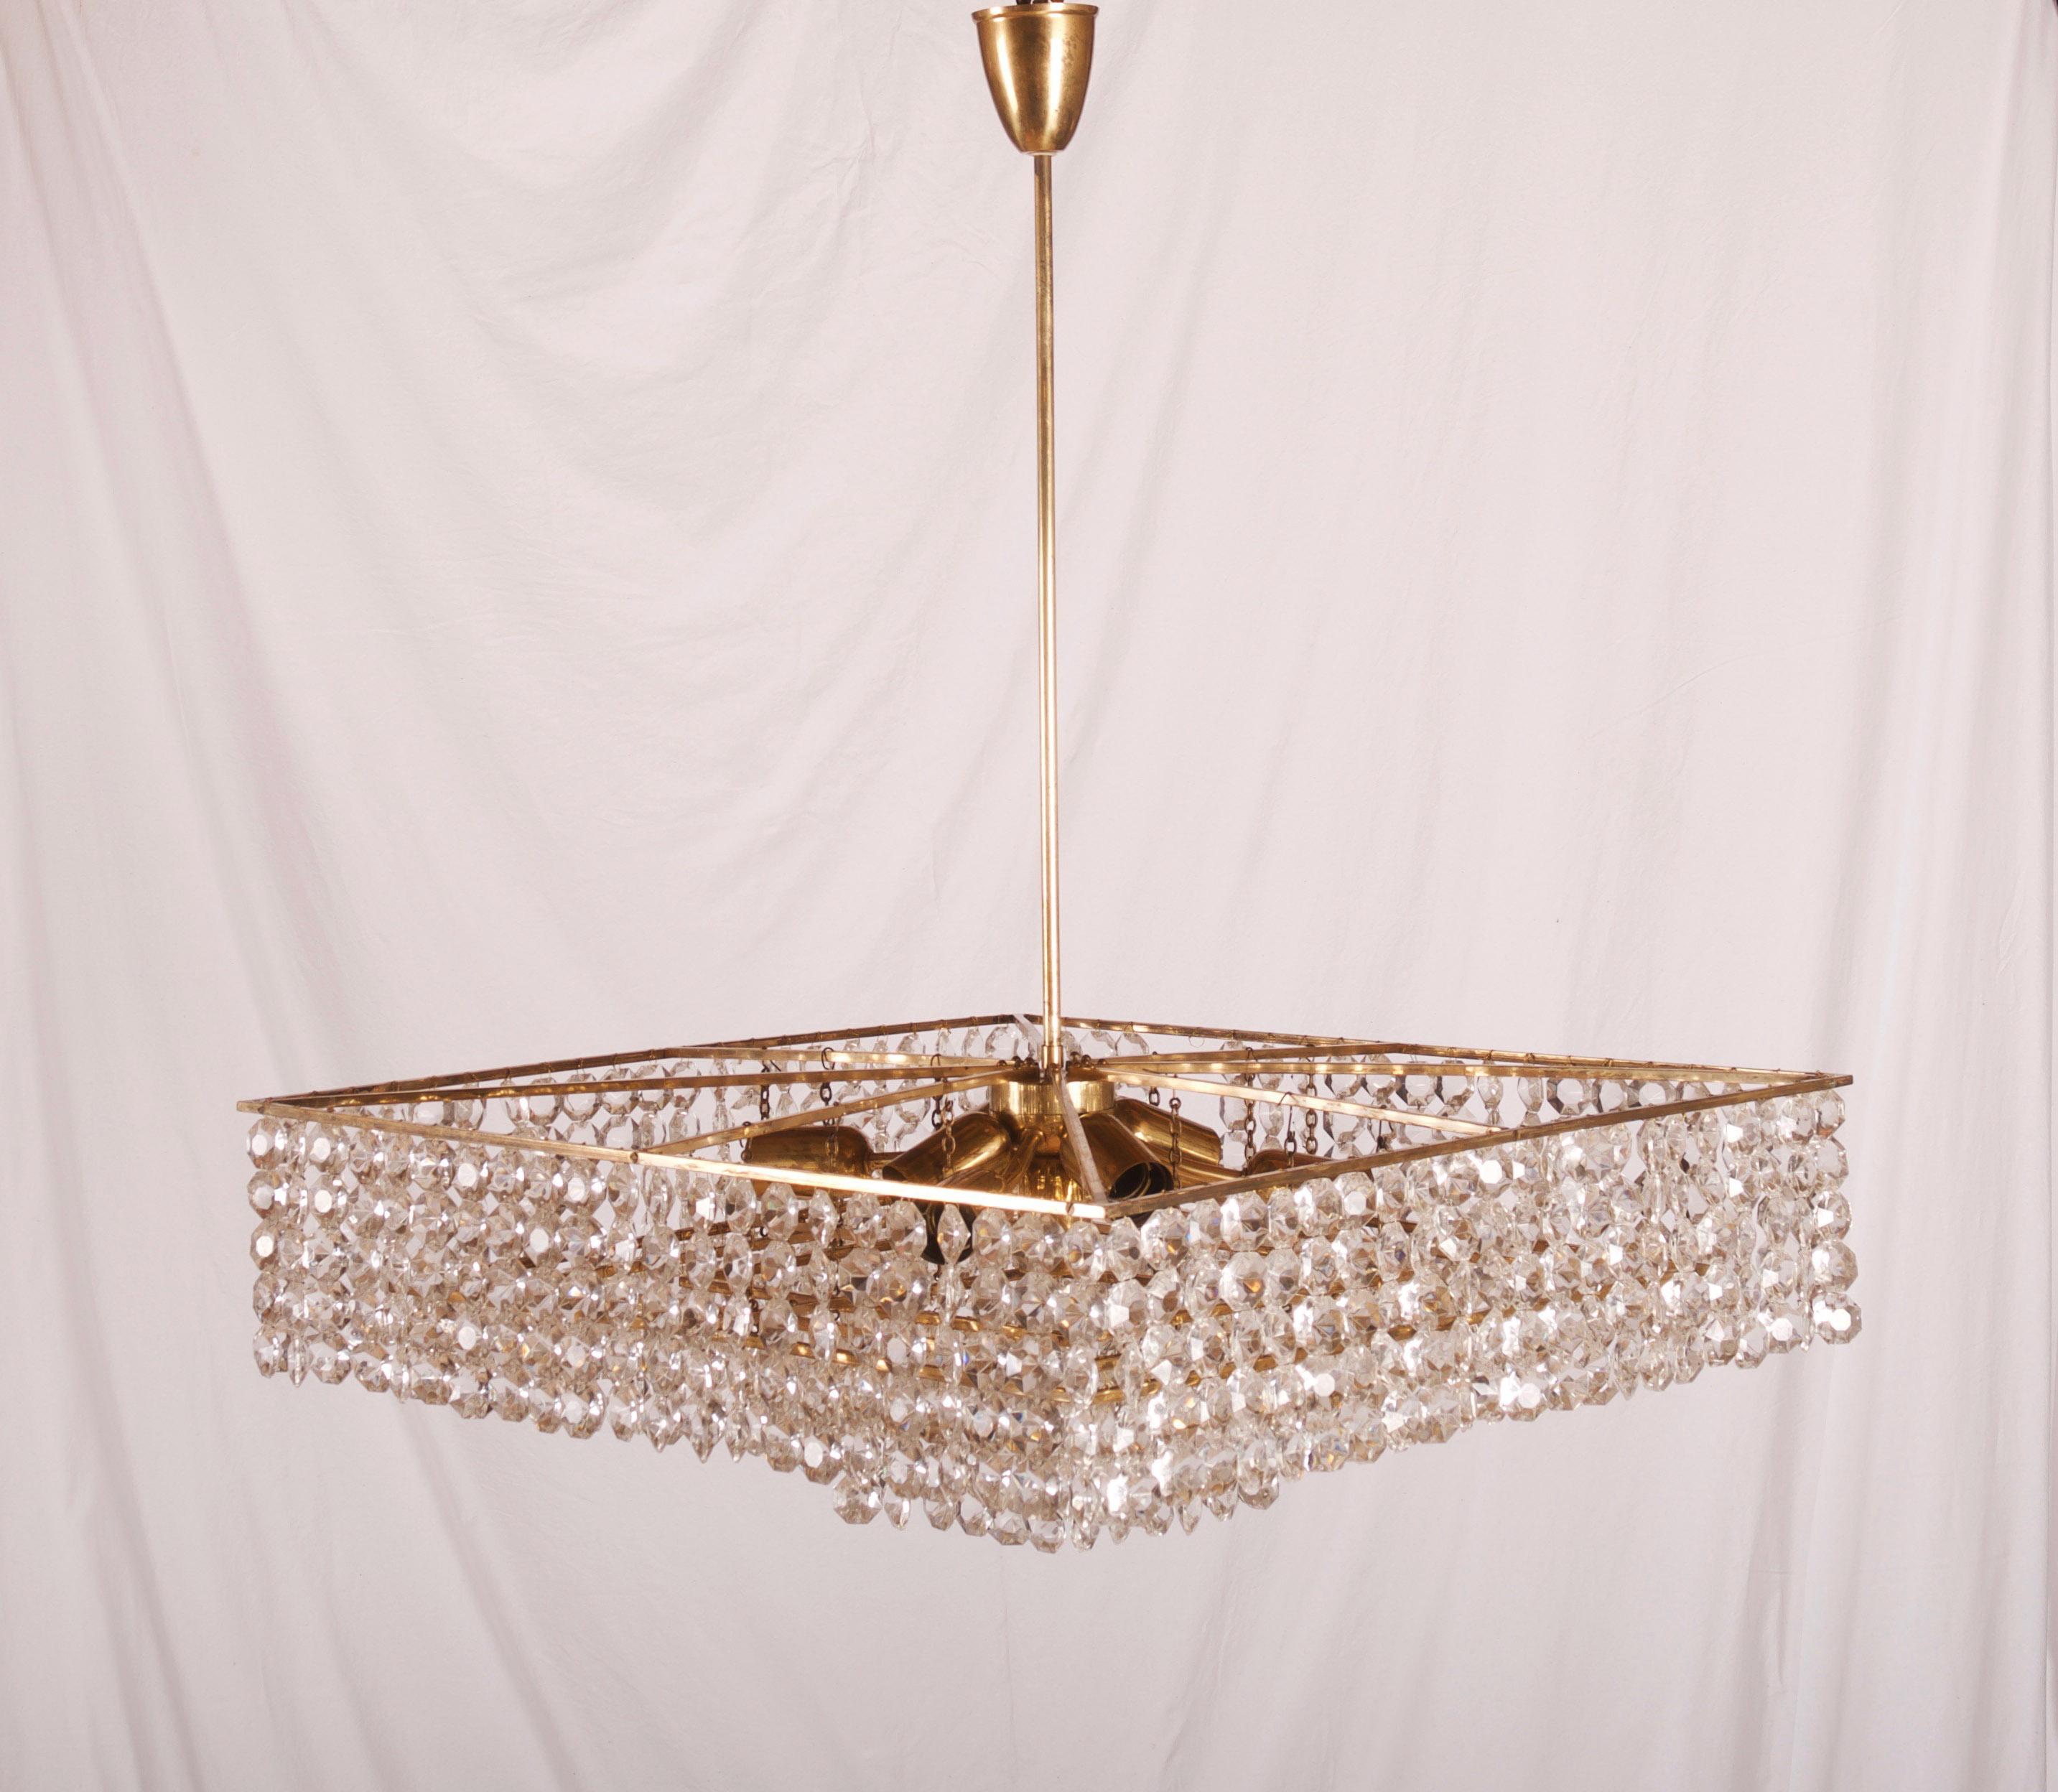 Brass Midcentury Square Cut Crystal Chandelier For Sale